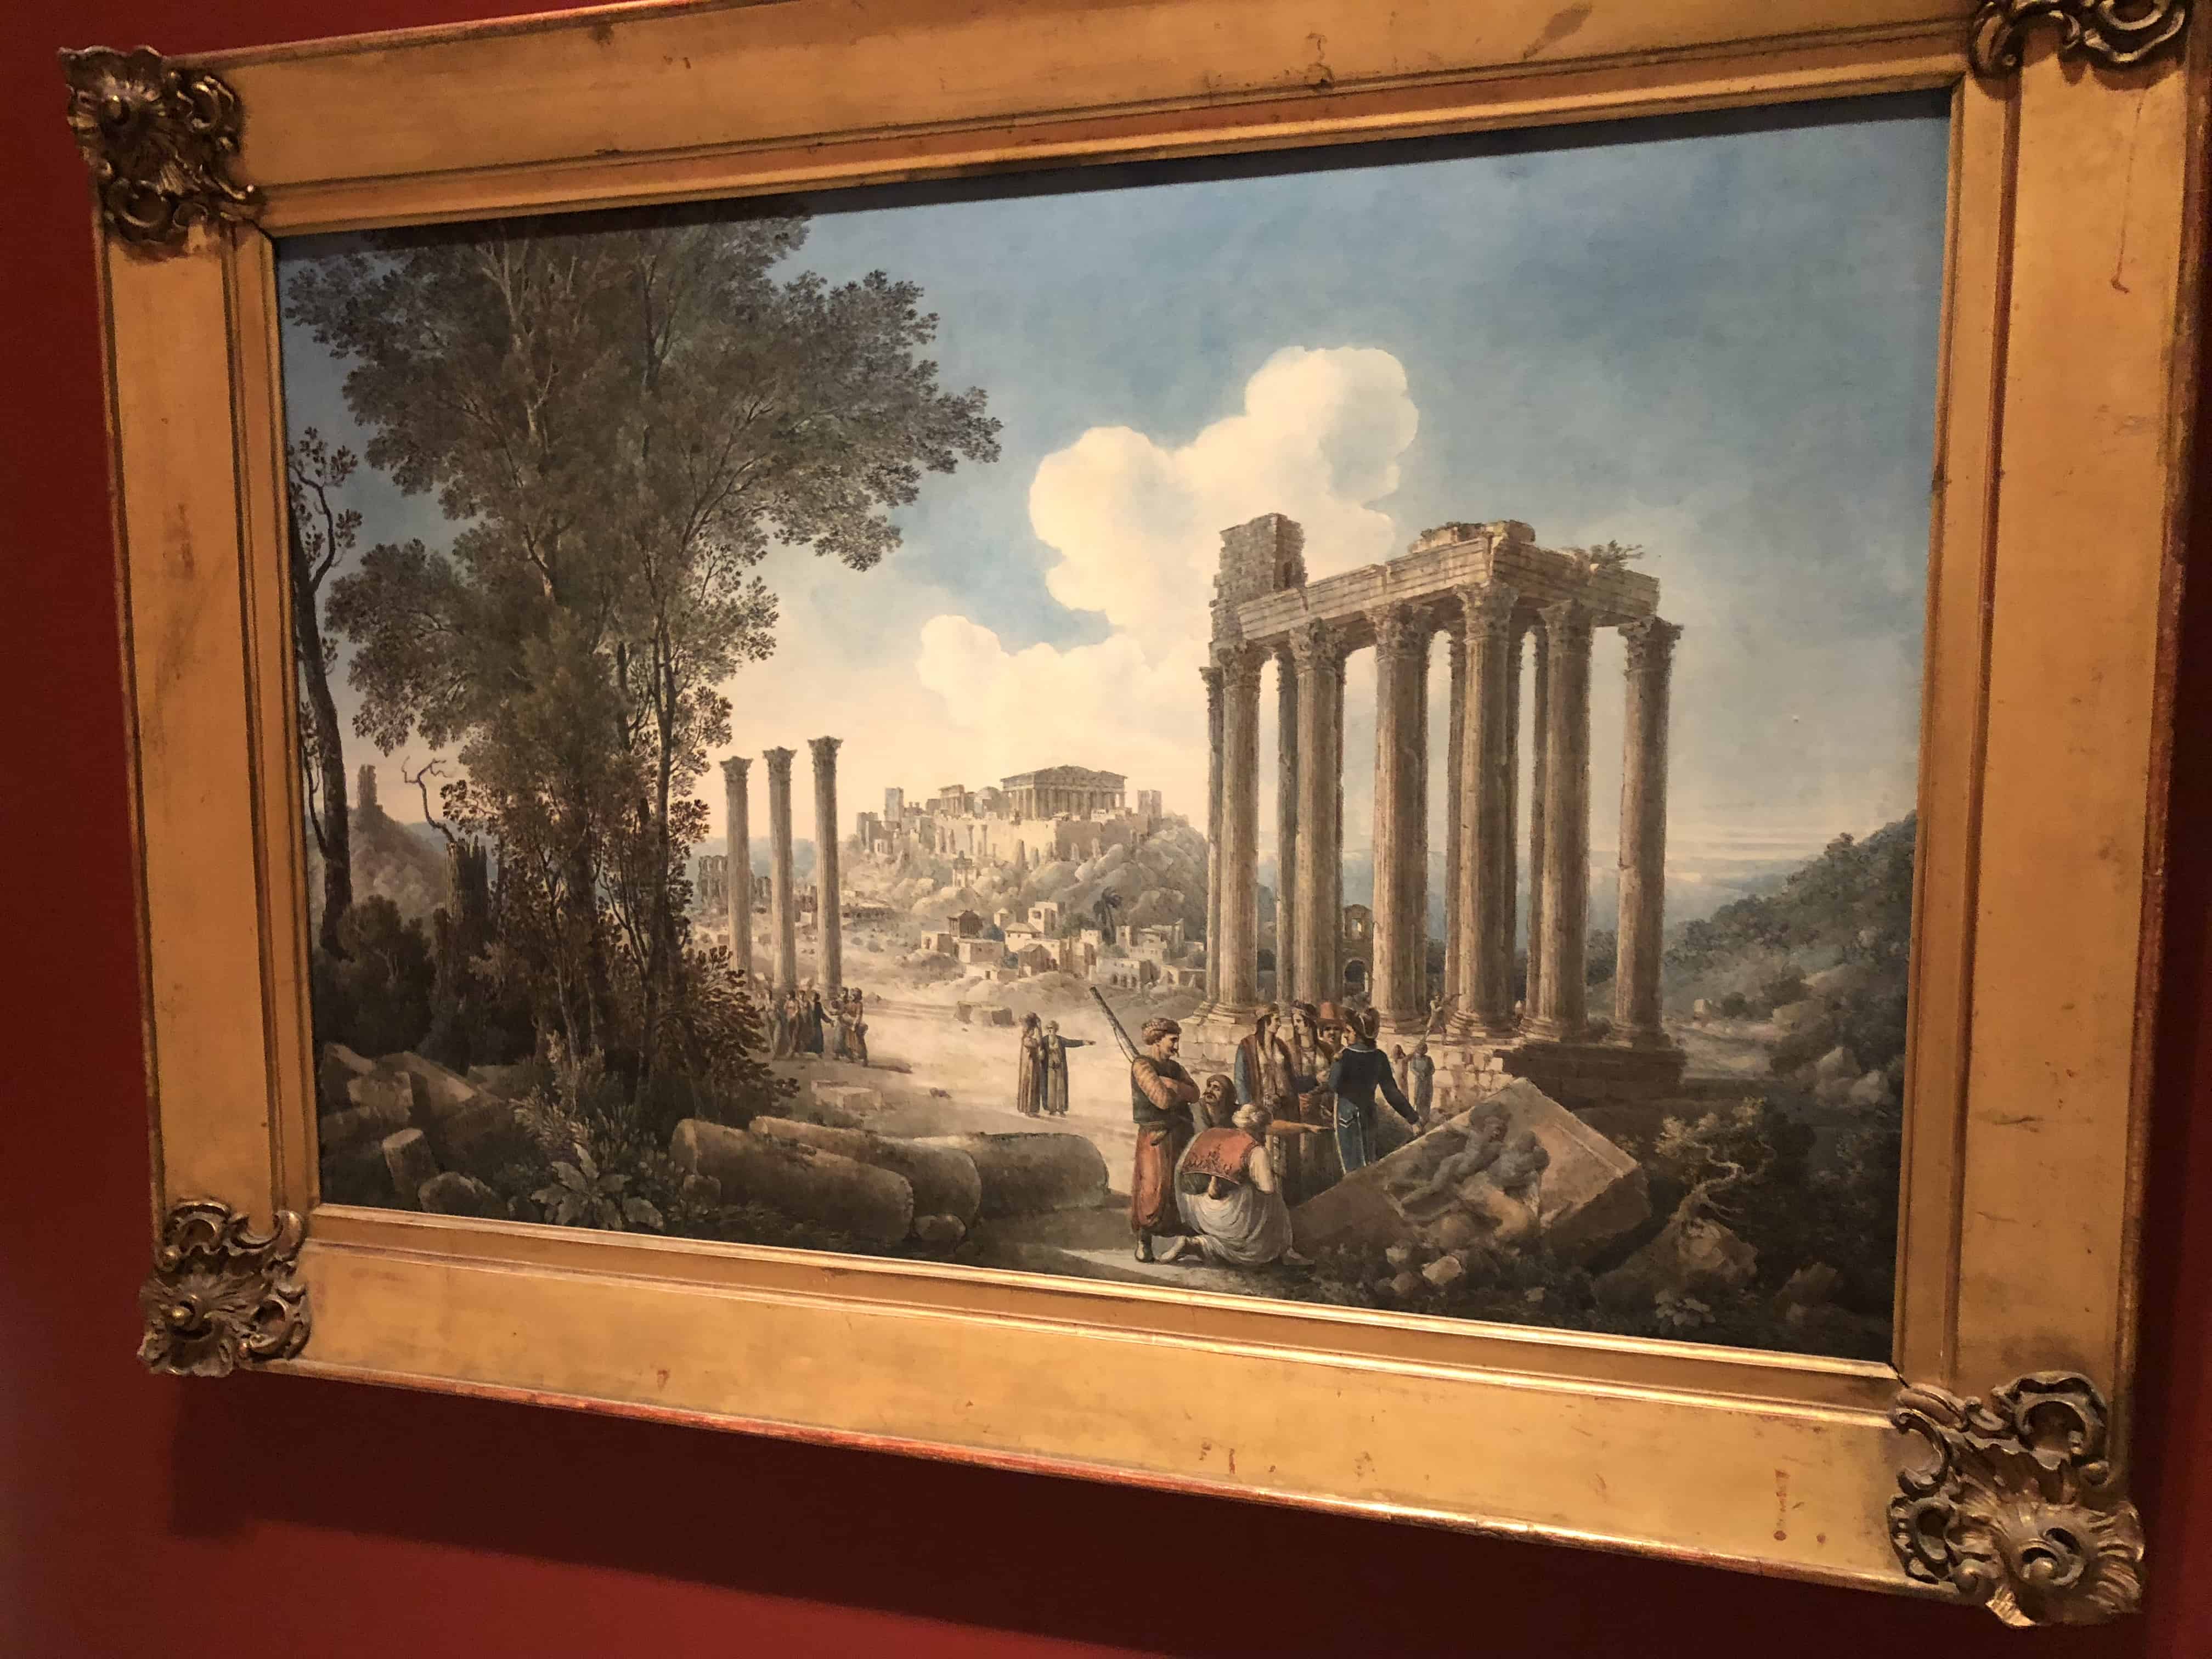 Athens at the Pera Museum in Istanbul, Turkey